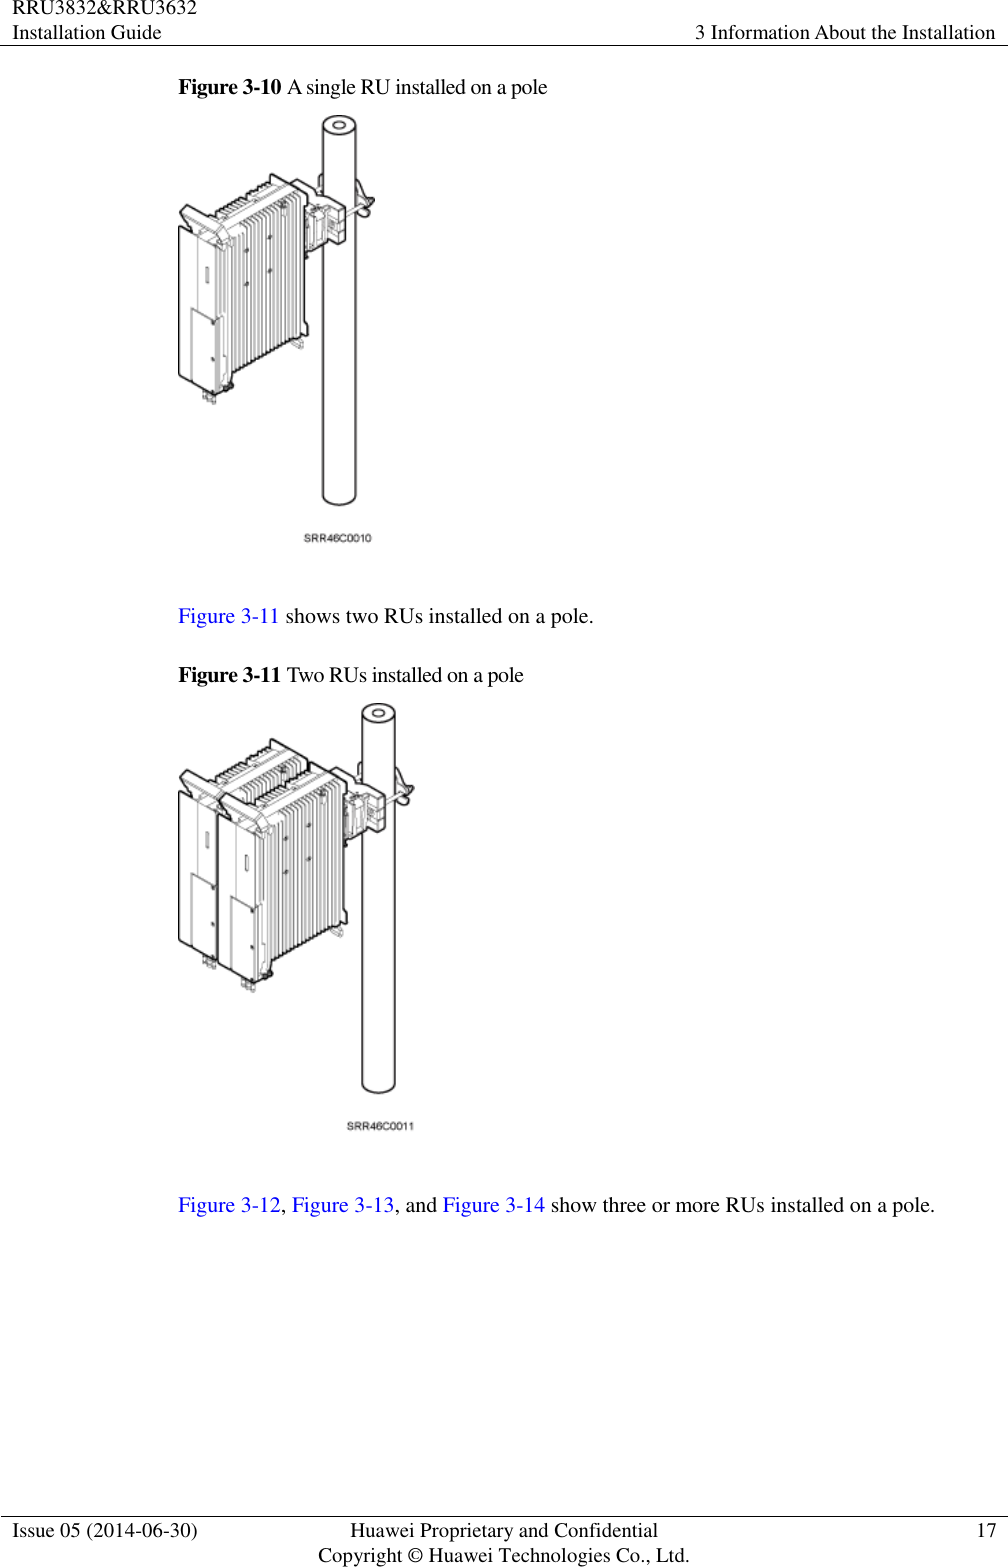 RRU3832&amp;RRU3632 Installation Guide 3 Information About the Installation  Issue 05 (2014-06-30) Huawei Proprietary and Confidential                                     Copyright © Huawei Technologies Co., Ltd. 17  Figure 3-10 A single RU installed on a pole   Figure 3-11 shows two RUs installed on a pole. Figure 3-11 Two RUs installed on a pole   Figure 3-12, Figure 3-13, and Figure 3-14 show three or more RUs installed on a pole. 